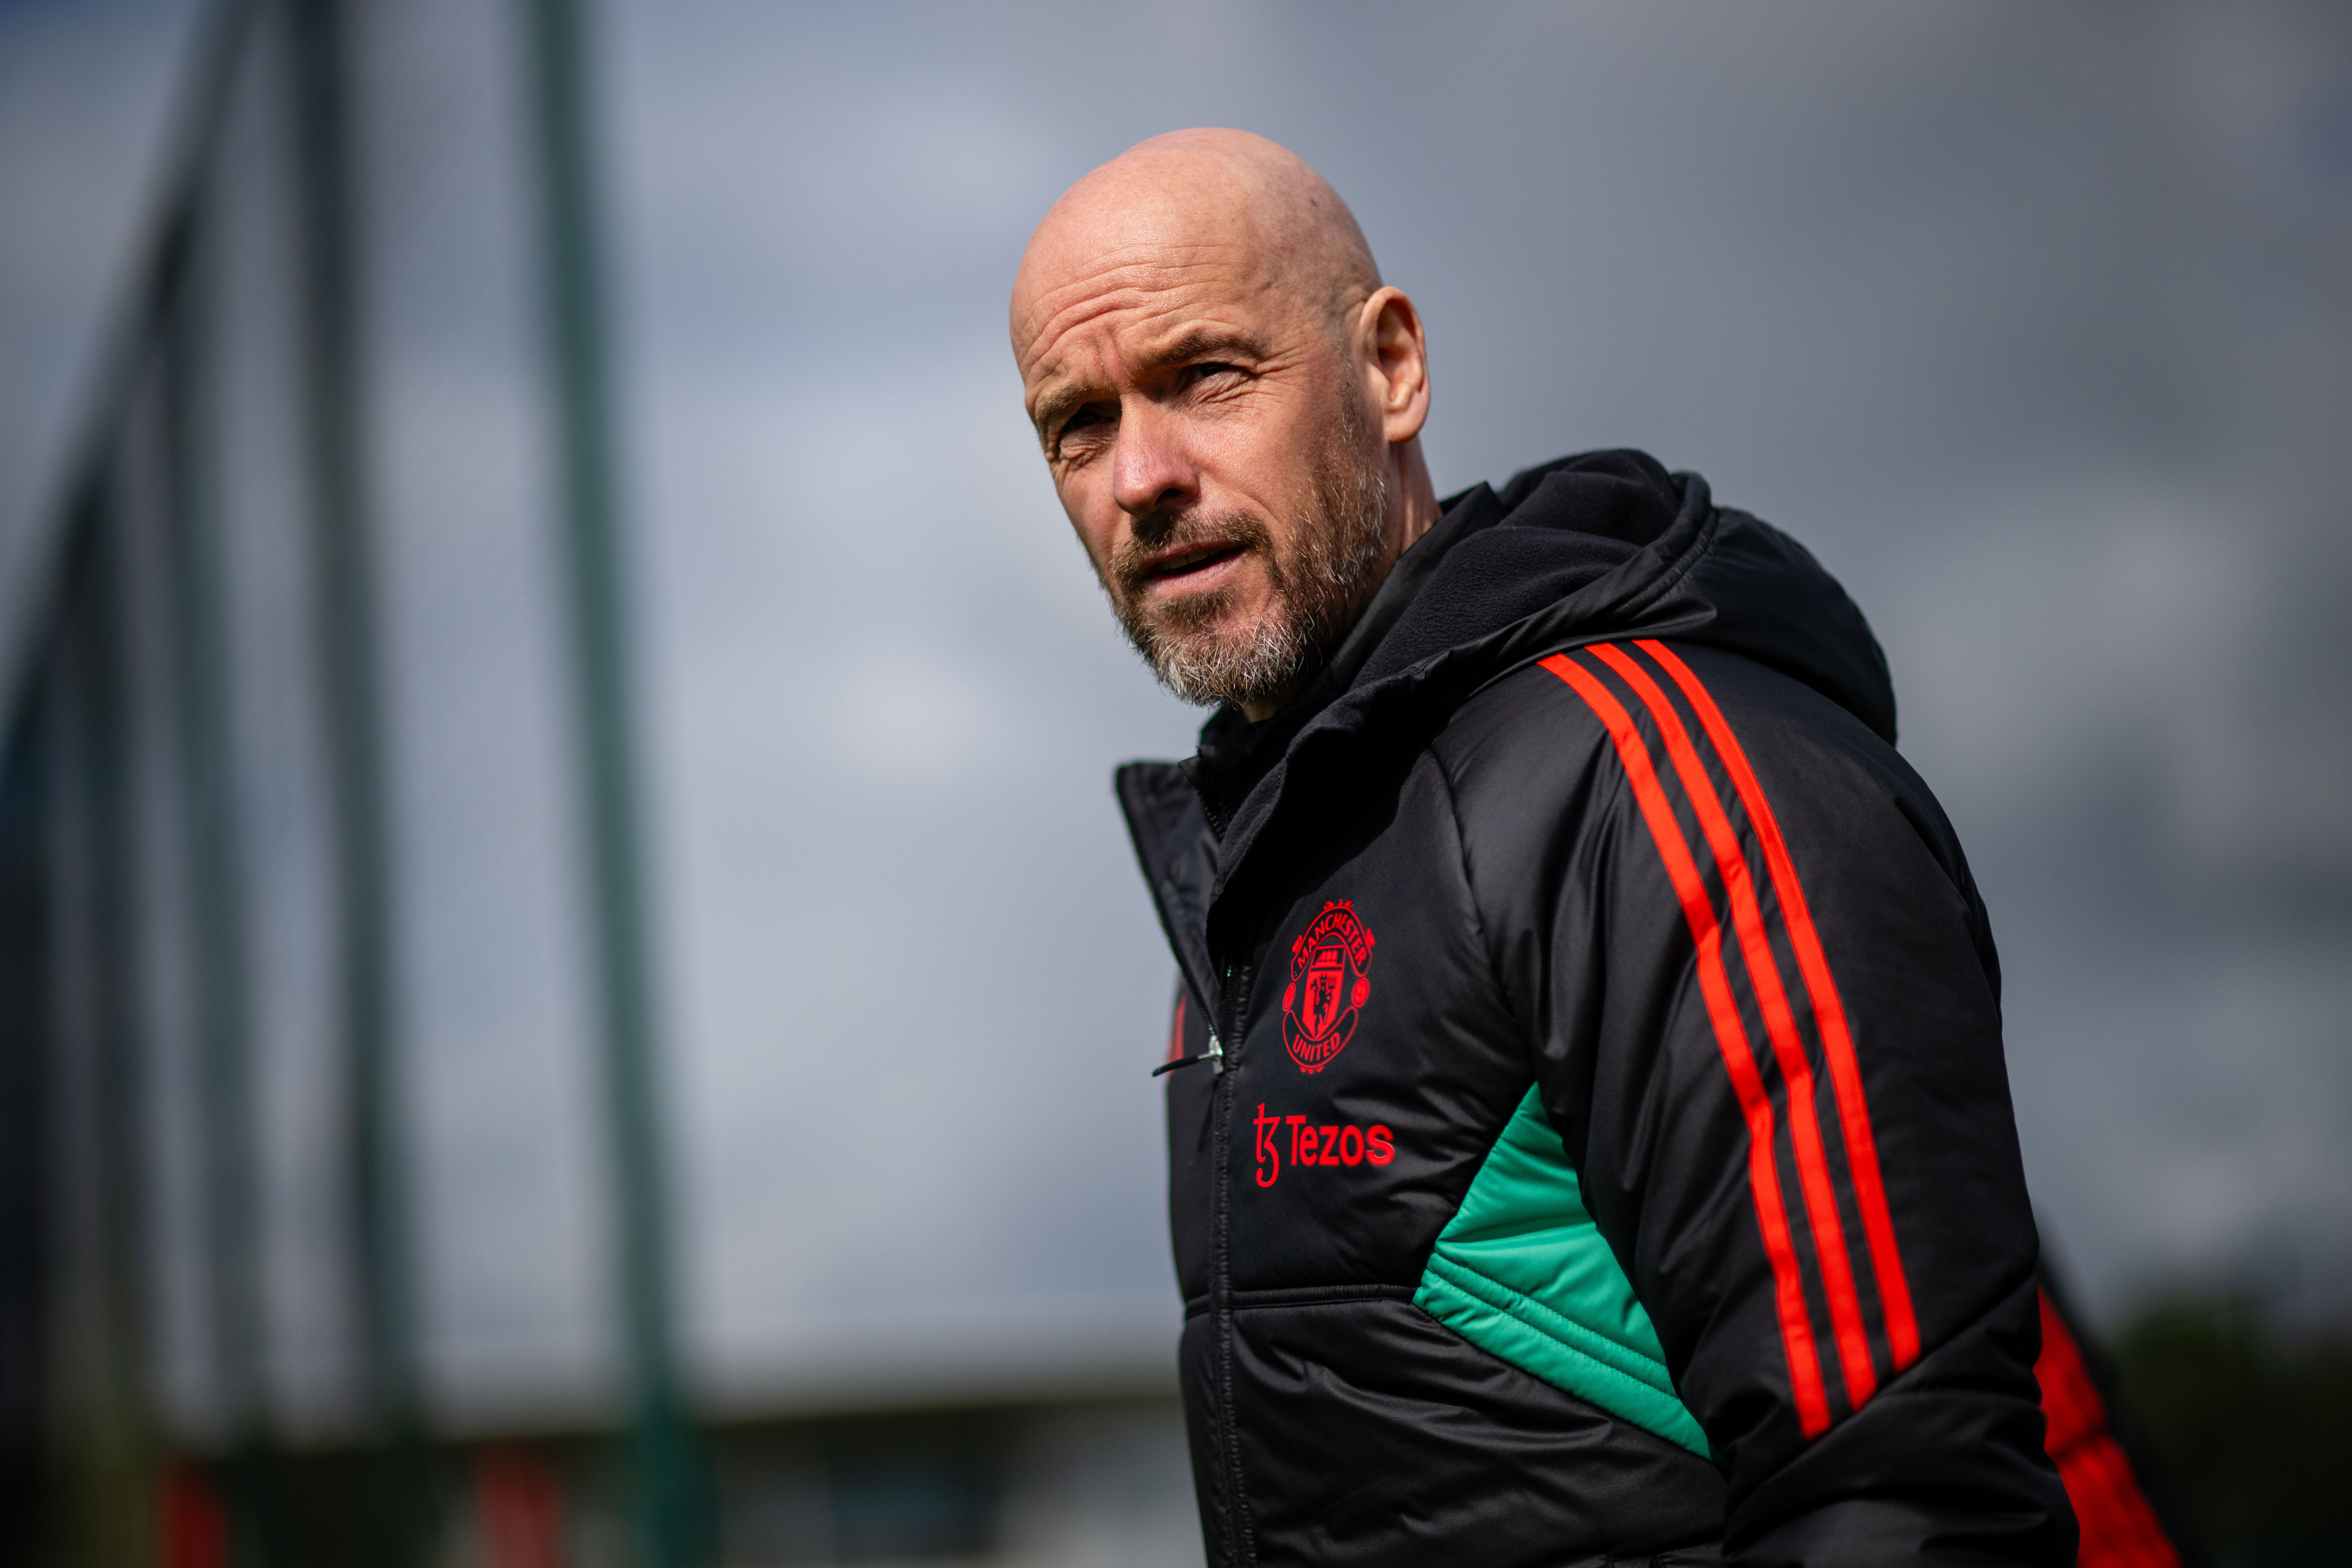 Erik ten Hag's expected sacking may start a managerial merry-go-round